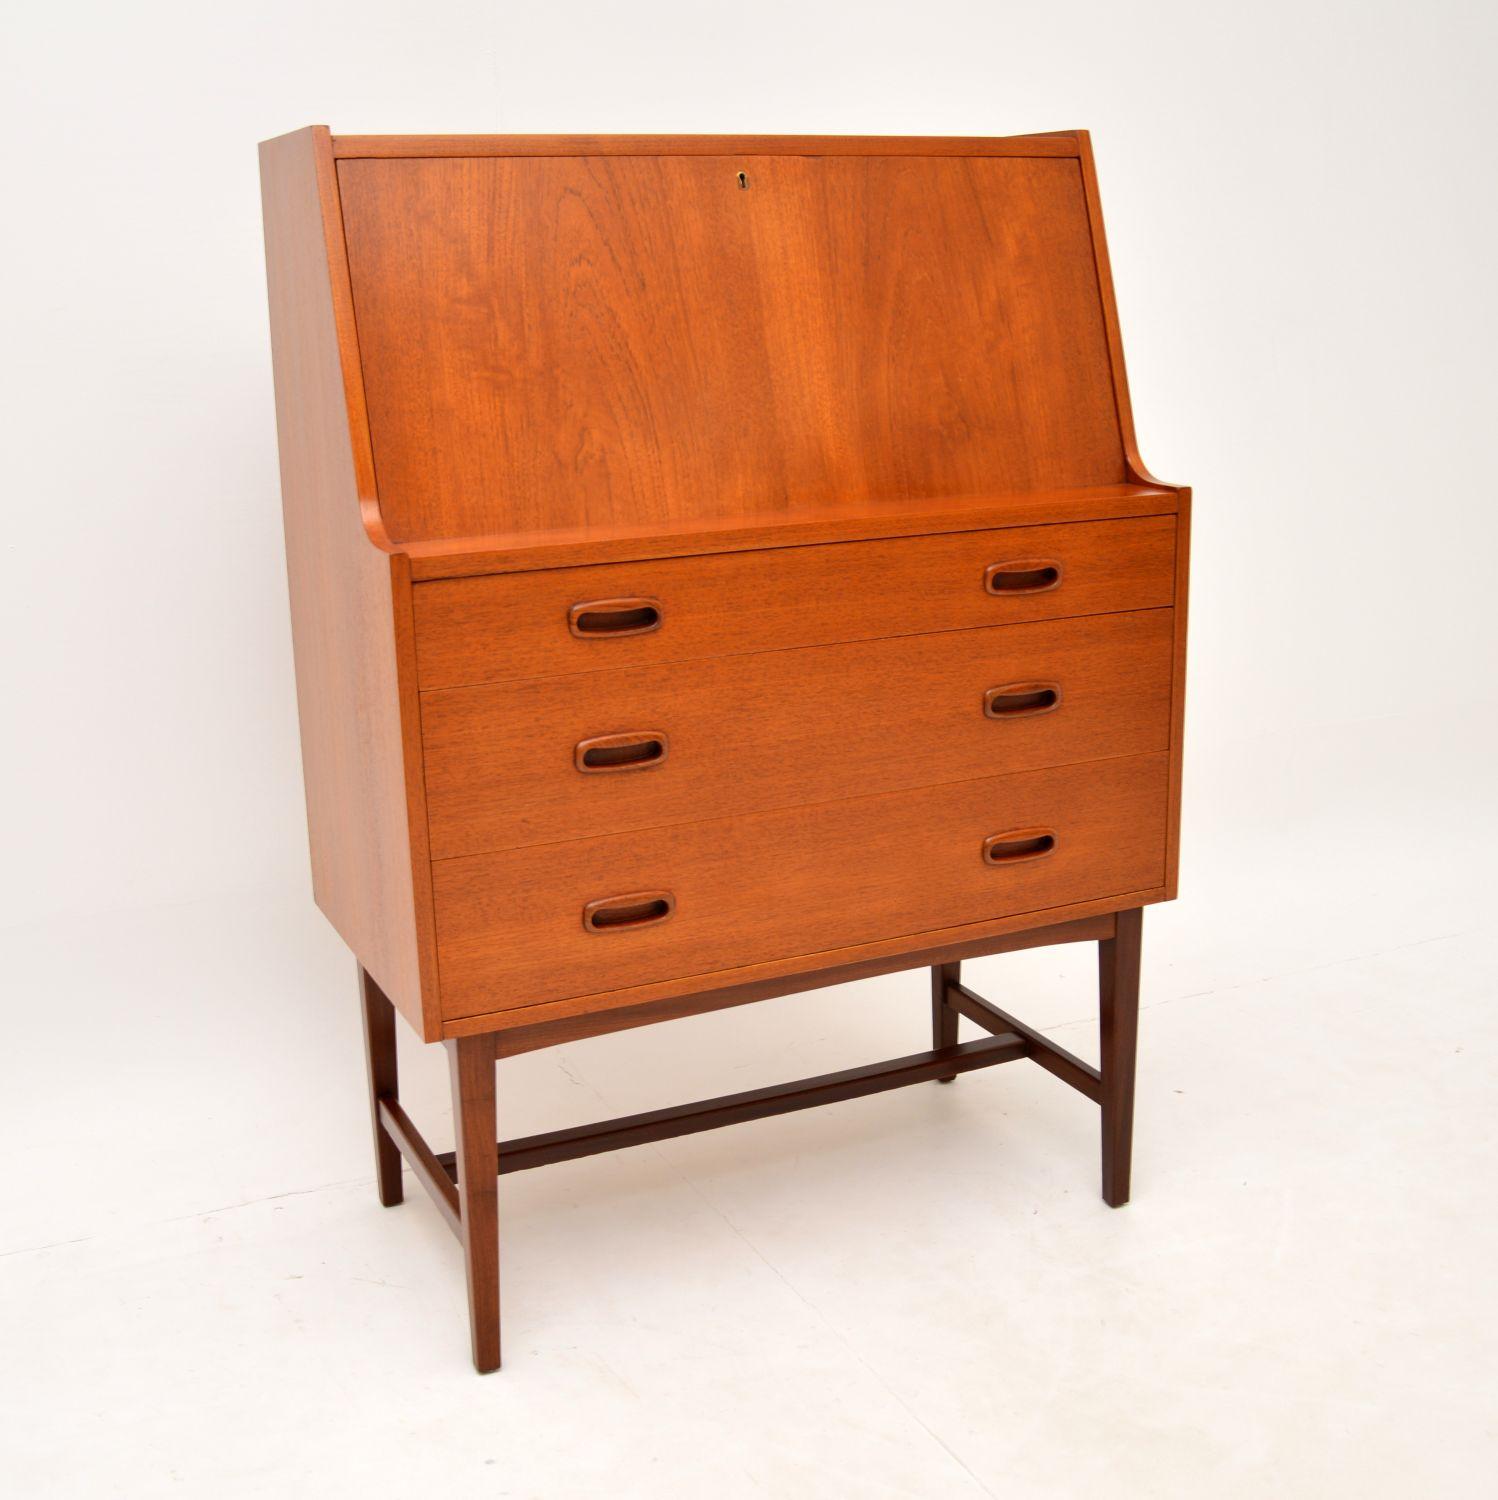 A stylish and practical vintage bureau in teak, this was made in Denmark and it dates from the 1960’s.

It is of amazing quality and is a lovely size. this has a generous work space and lots of storage space in the drawers below.

The teak has a